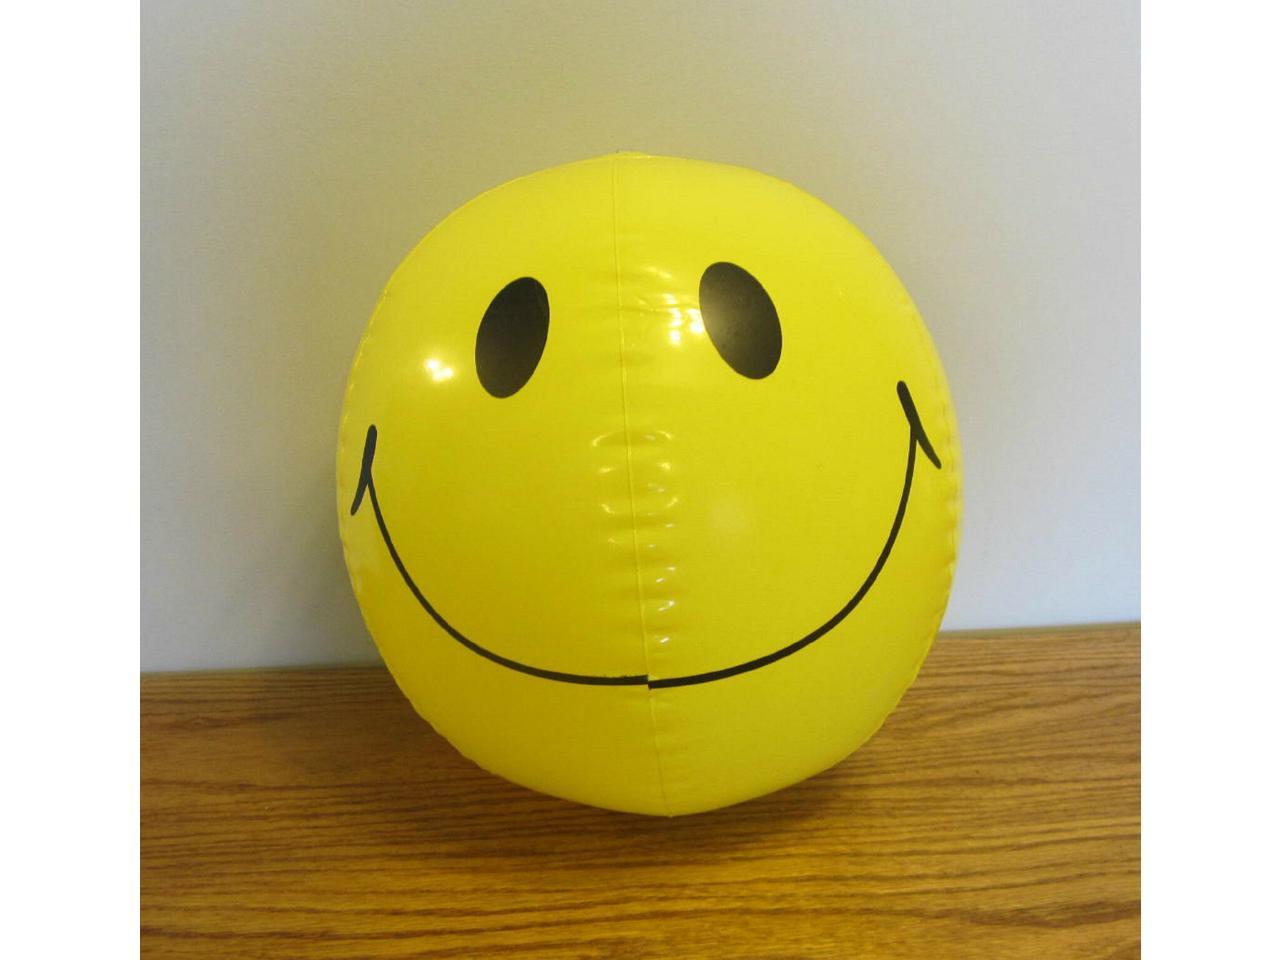 6 NEW LARGE YELLOW 15" SMILE FACE INFLATABLE BEACH BALLS  POOL BEACHBALL OCEAN